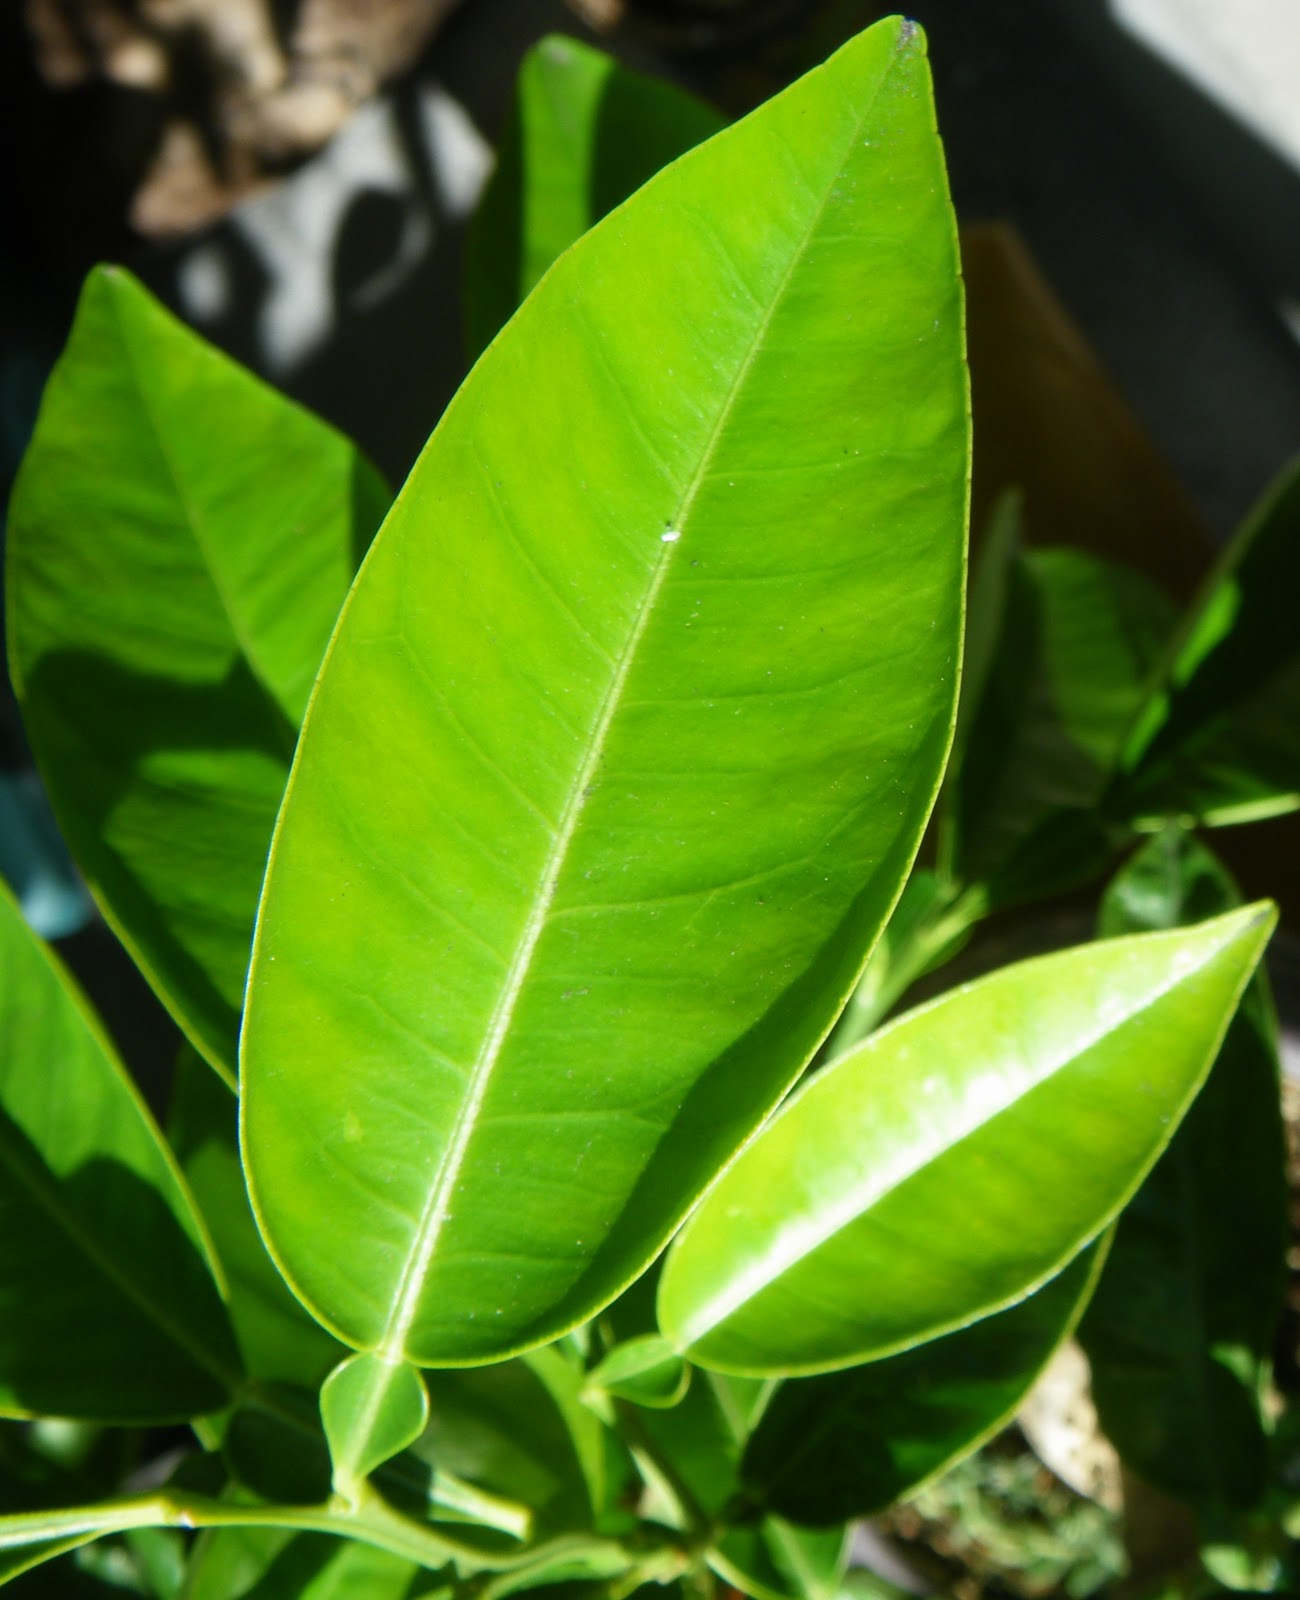 Scented Leaf: Lemon Tree is a perfect addition in any garden